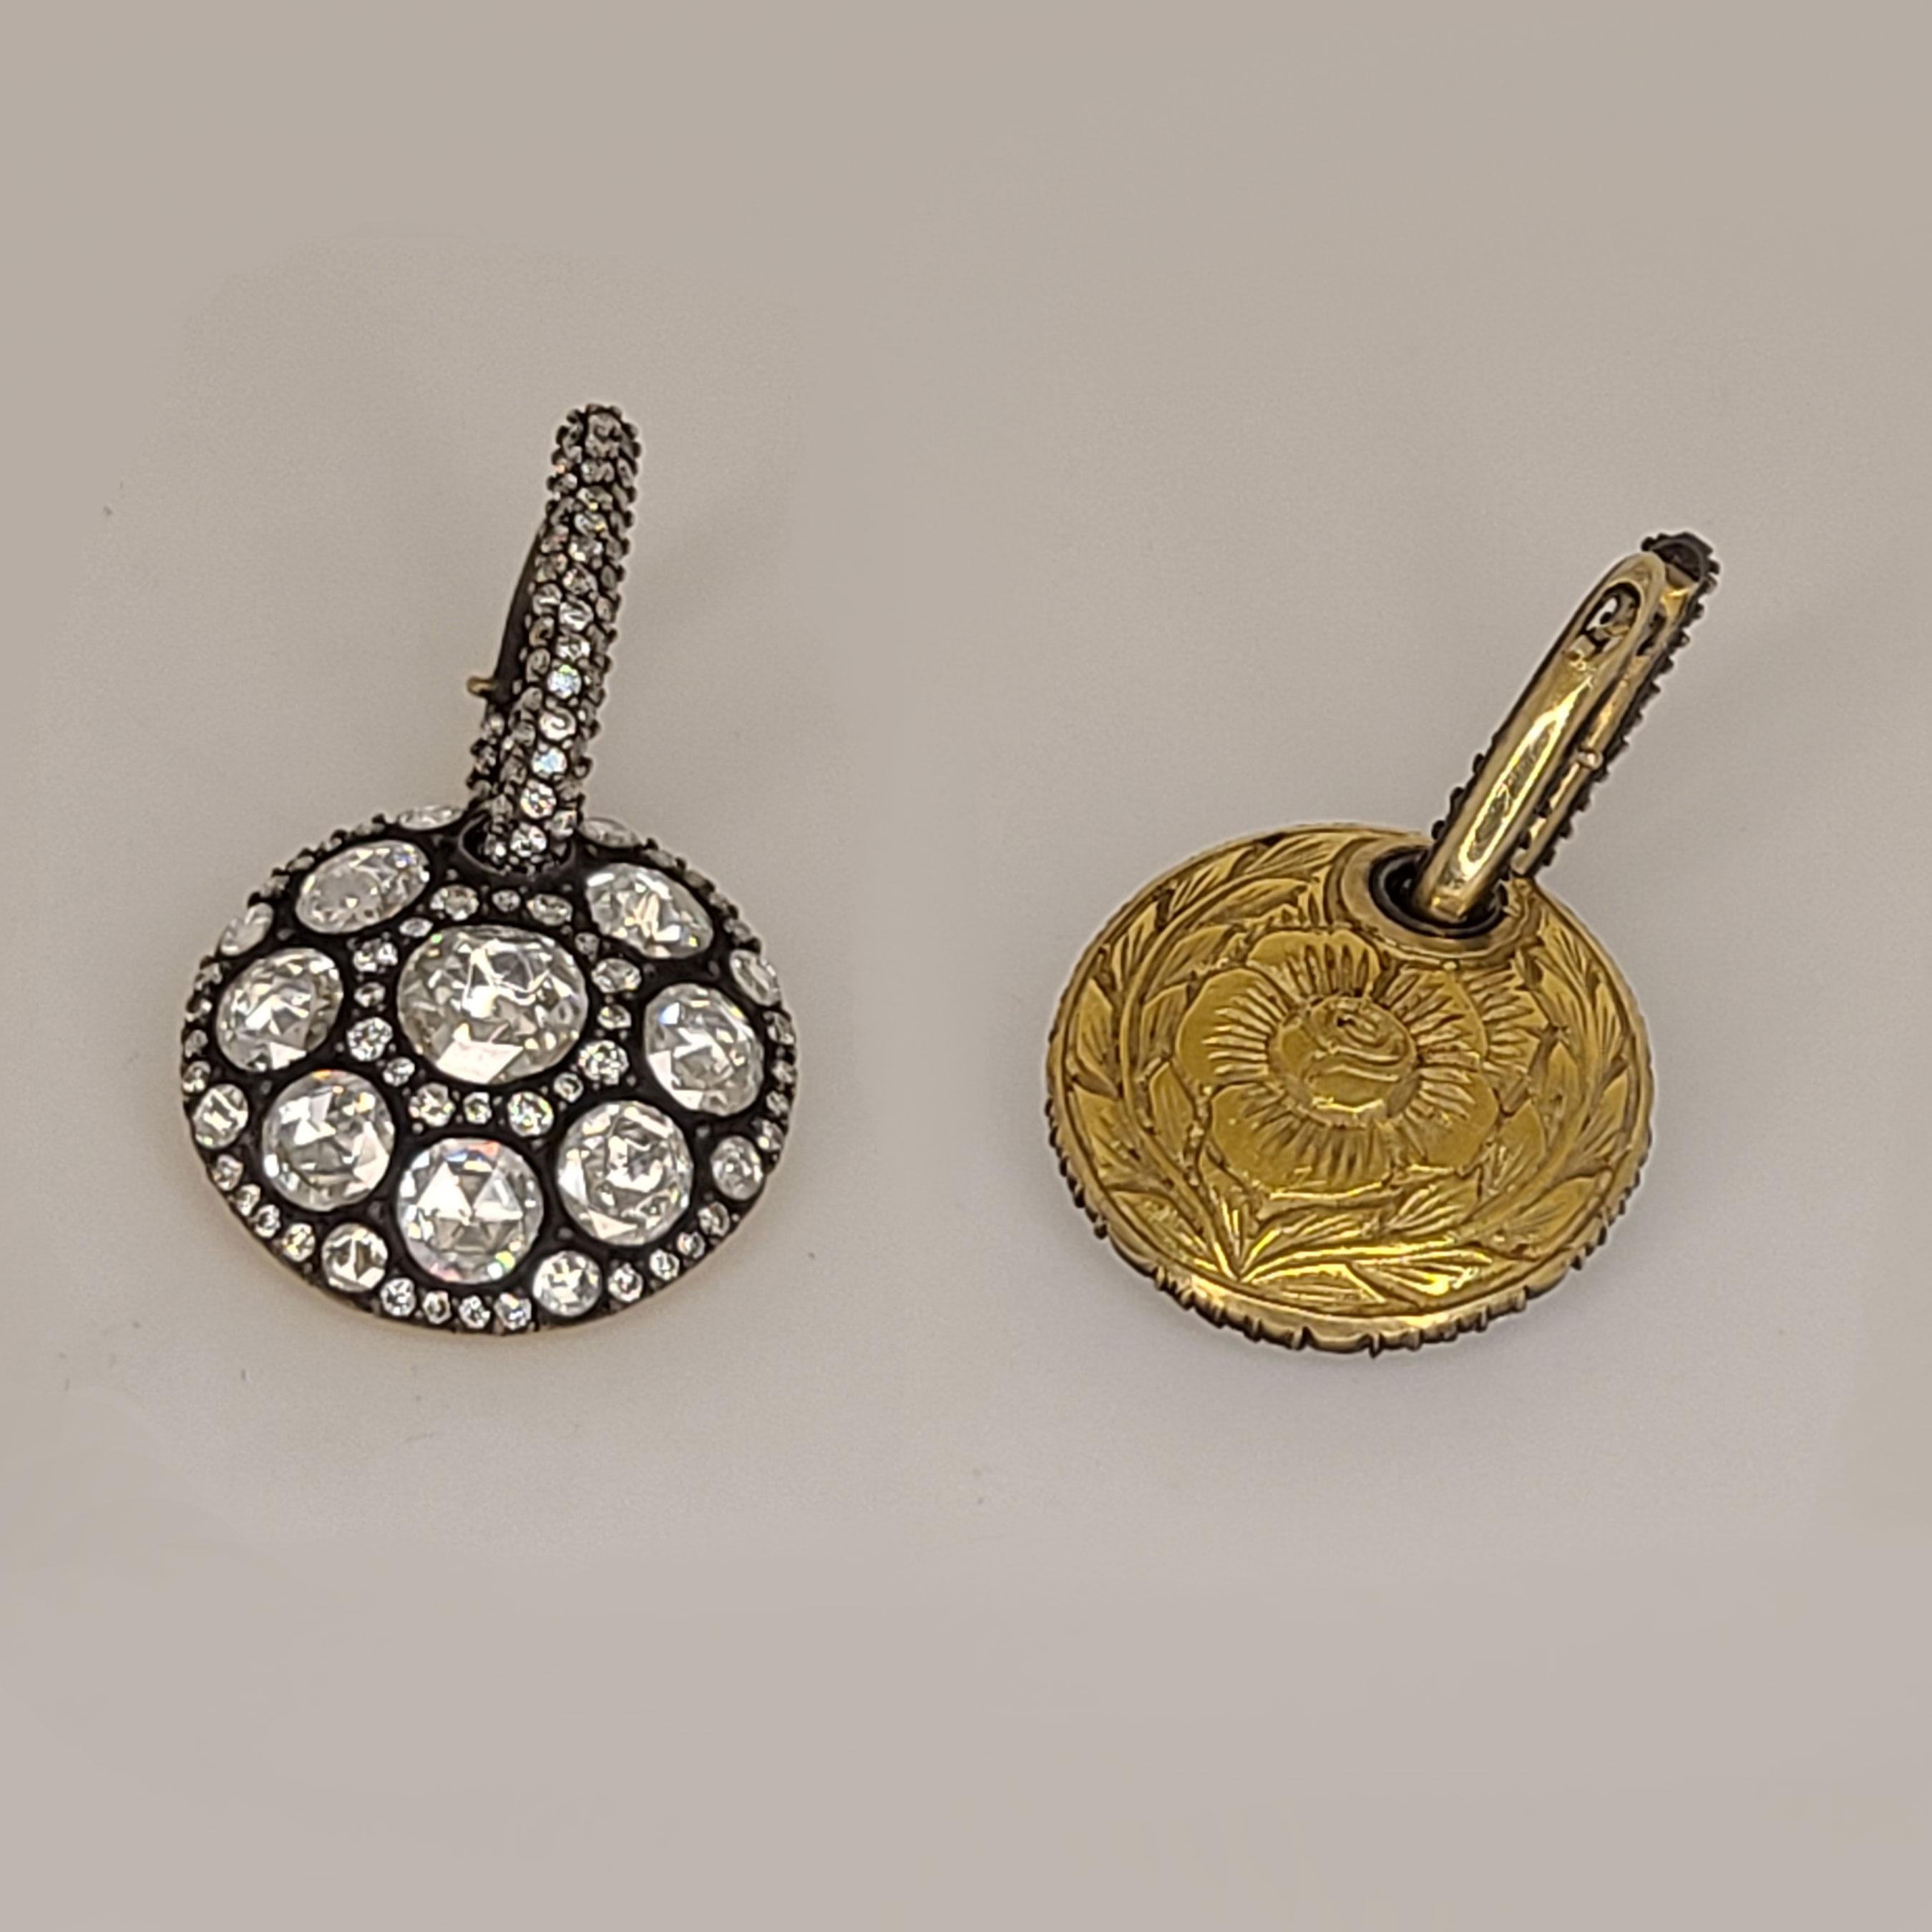 This 18K Gold earrings have 4.09cts of rose-cut Diamonds and 1.28cts of full-cut round brilliant Diamonds. These earrings are made of 18K Gold, however the rose-cut Diamonds are set on a sterling silver just like in its original times. Jewelry